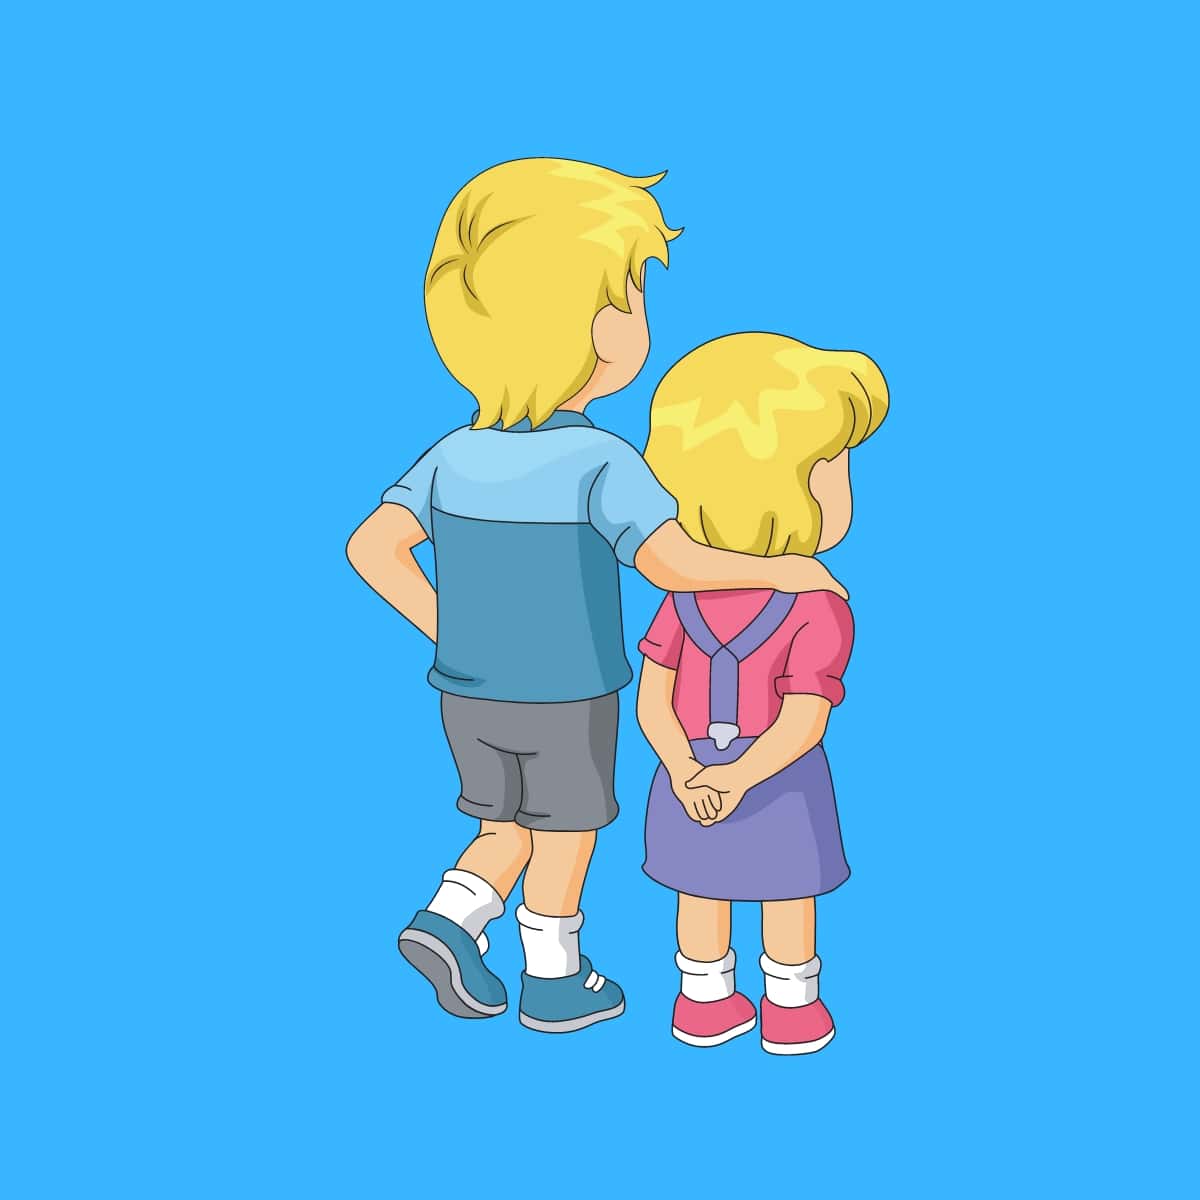 Cartoon graphic of a brother putting his arm around his younger sister on a blue background.